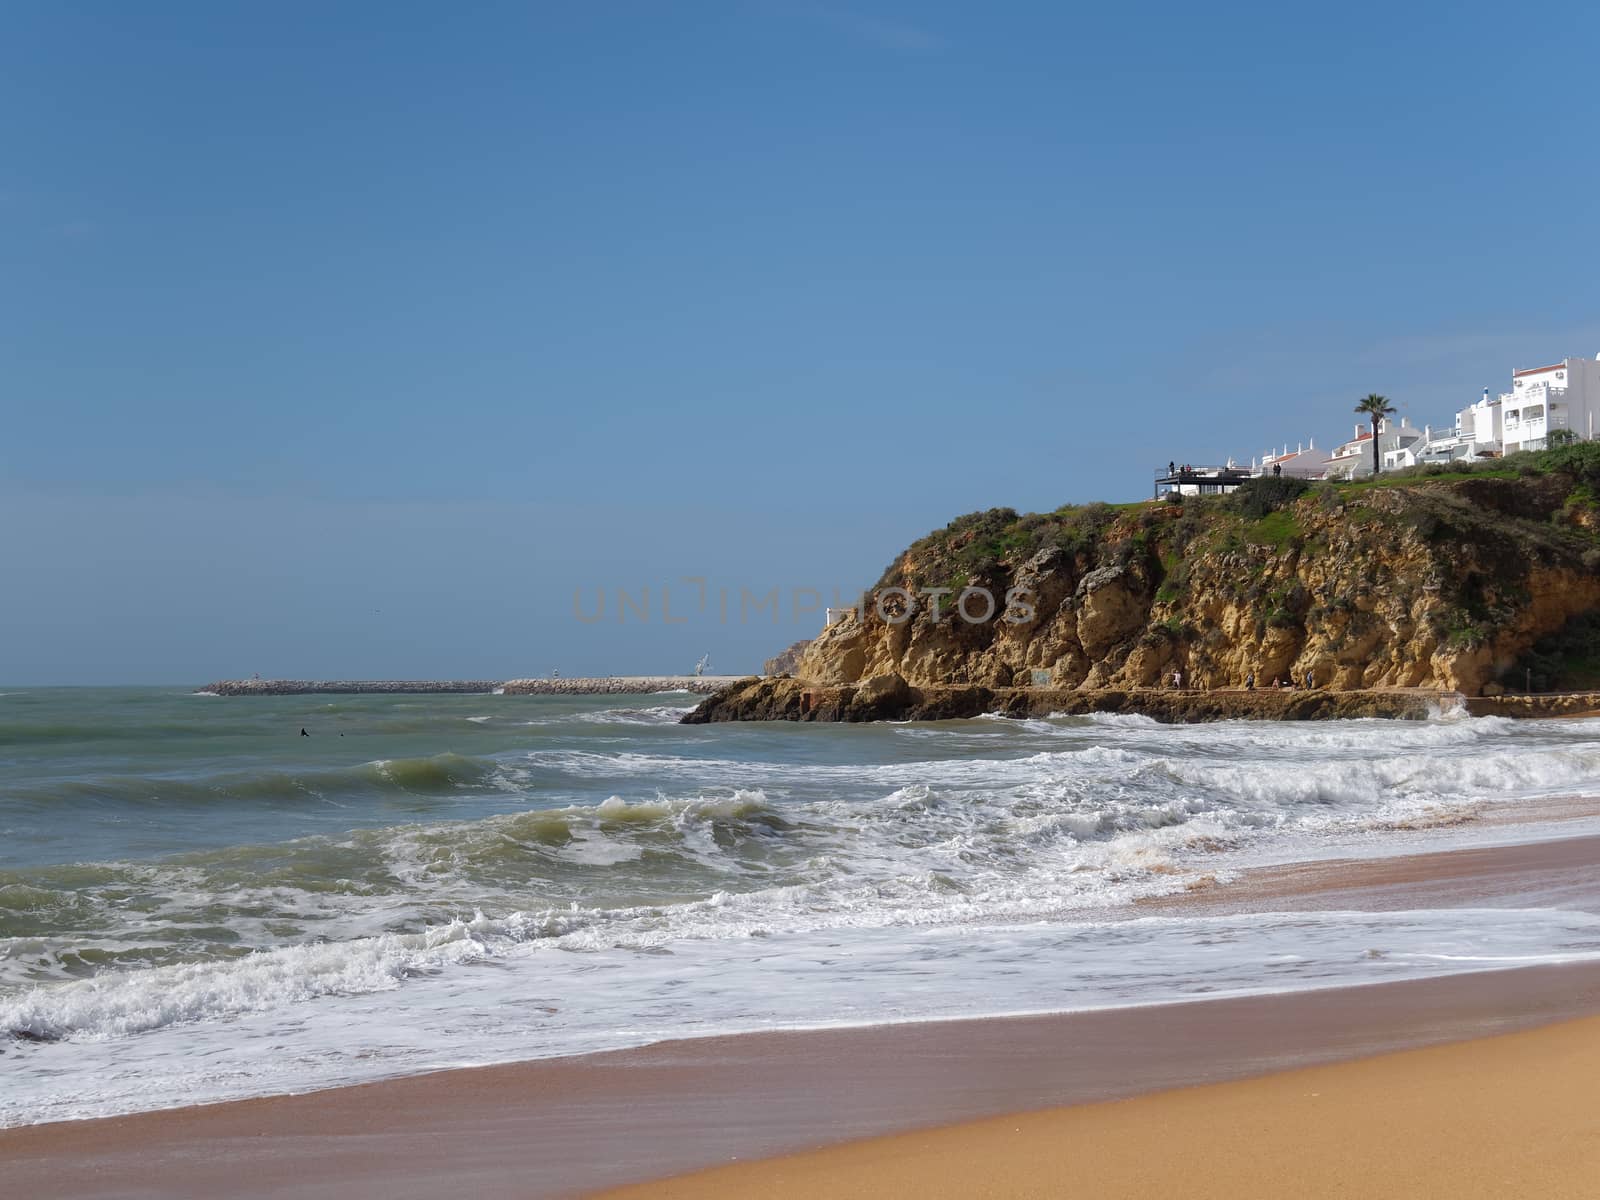 ALBUFEIRA, SOUTHERN ALGARVE/PORTUGAL - MARCH 10 : View of the Beach at Albufeira in Portugal on March 10, 2018. Unidentified people